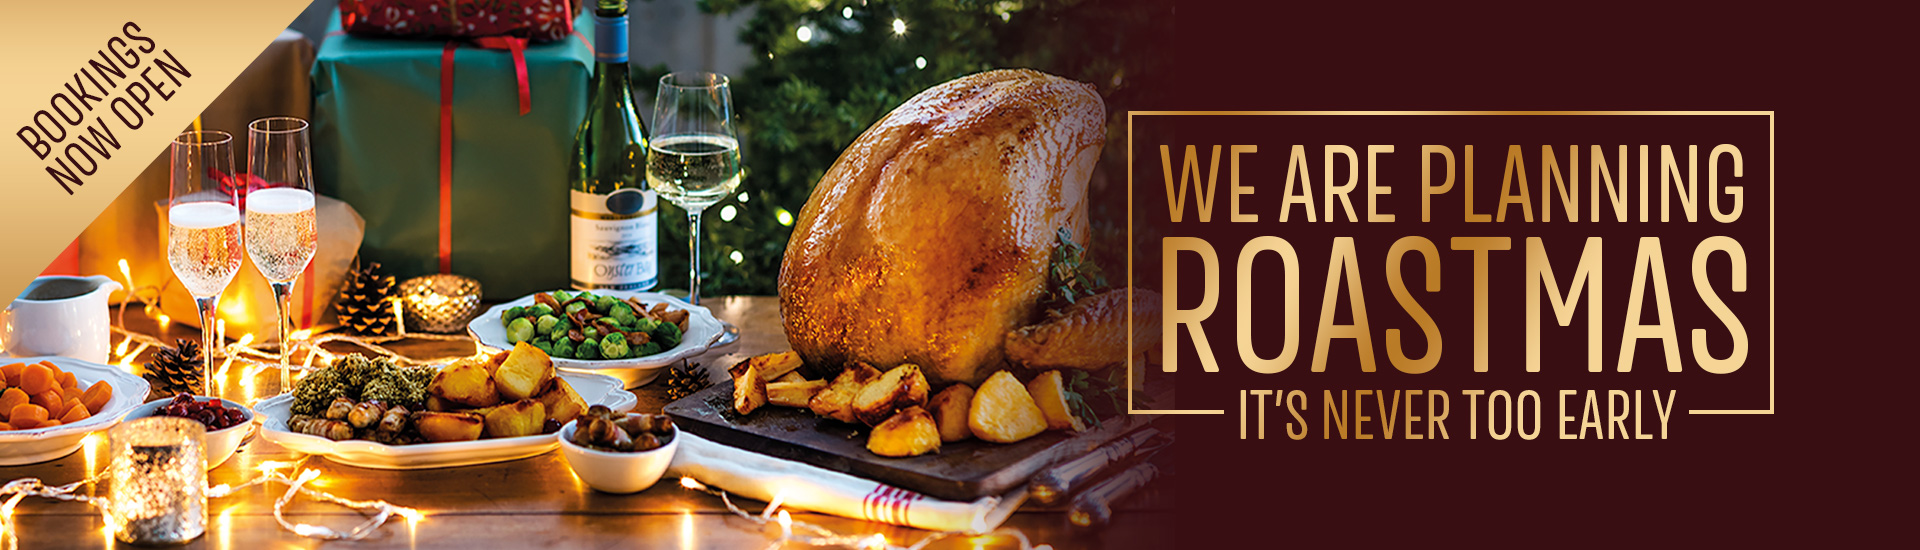 Christmas 2022 at your local Toby Carvery Bruntcliffe | Home of the Roast